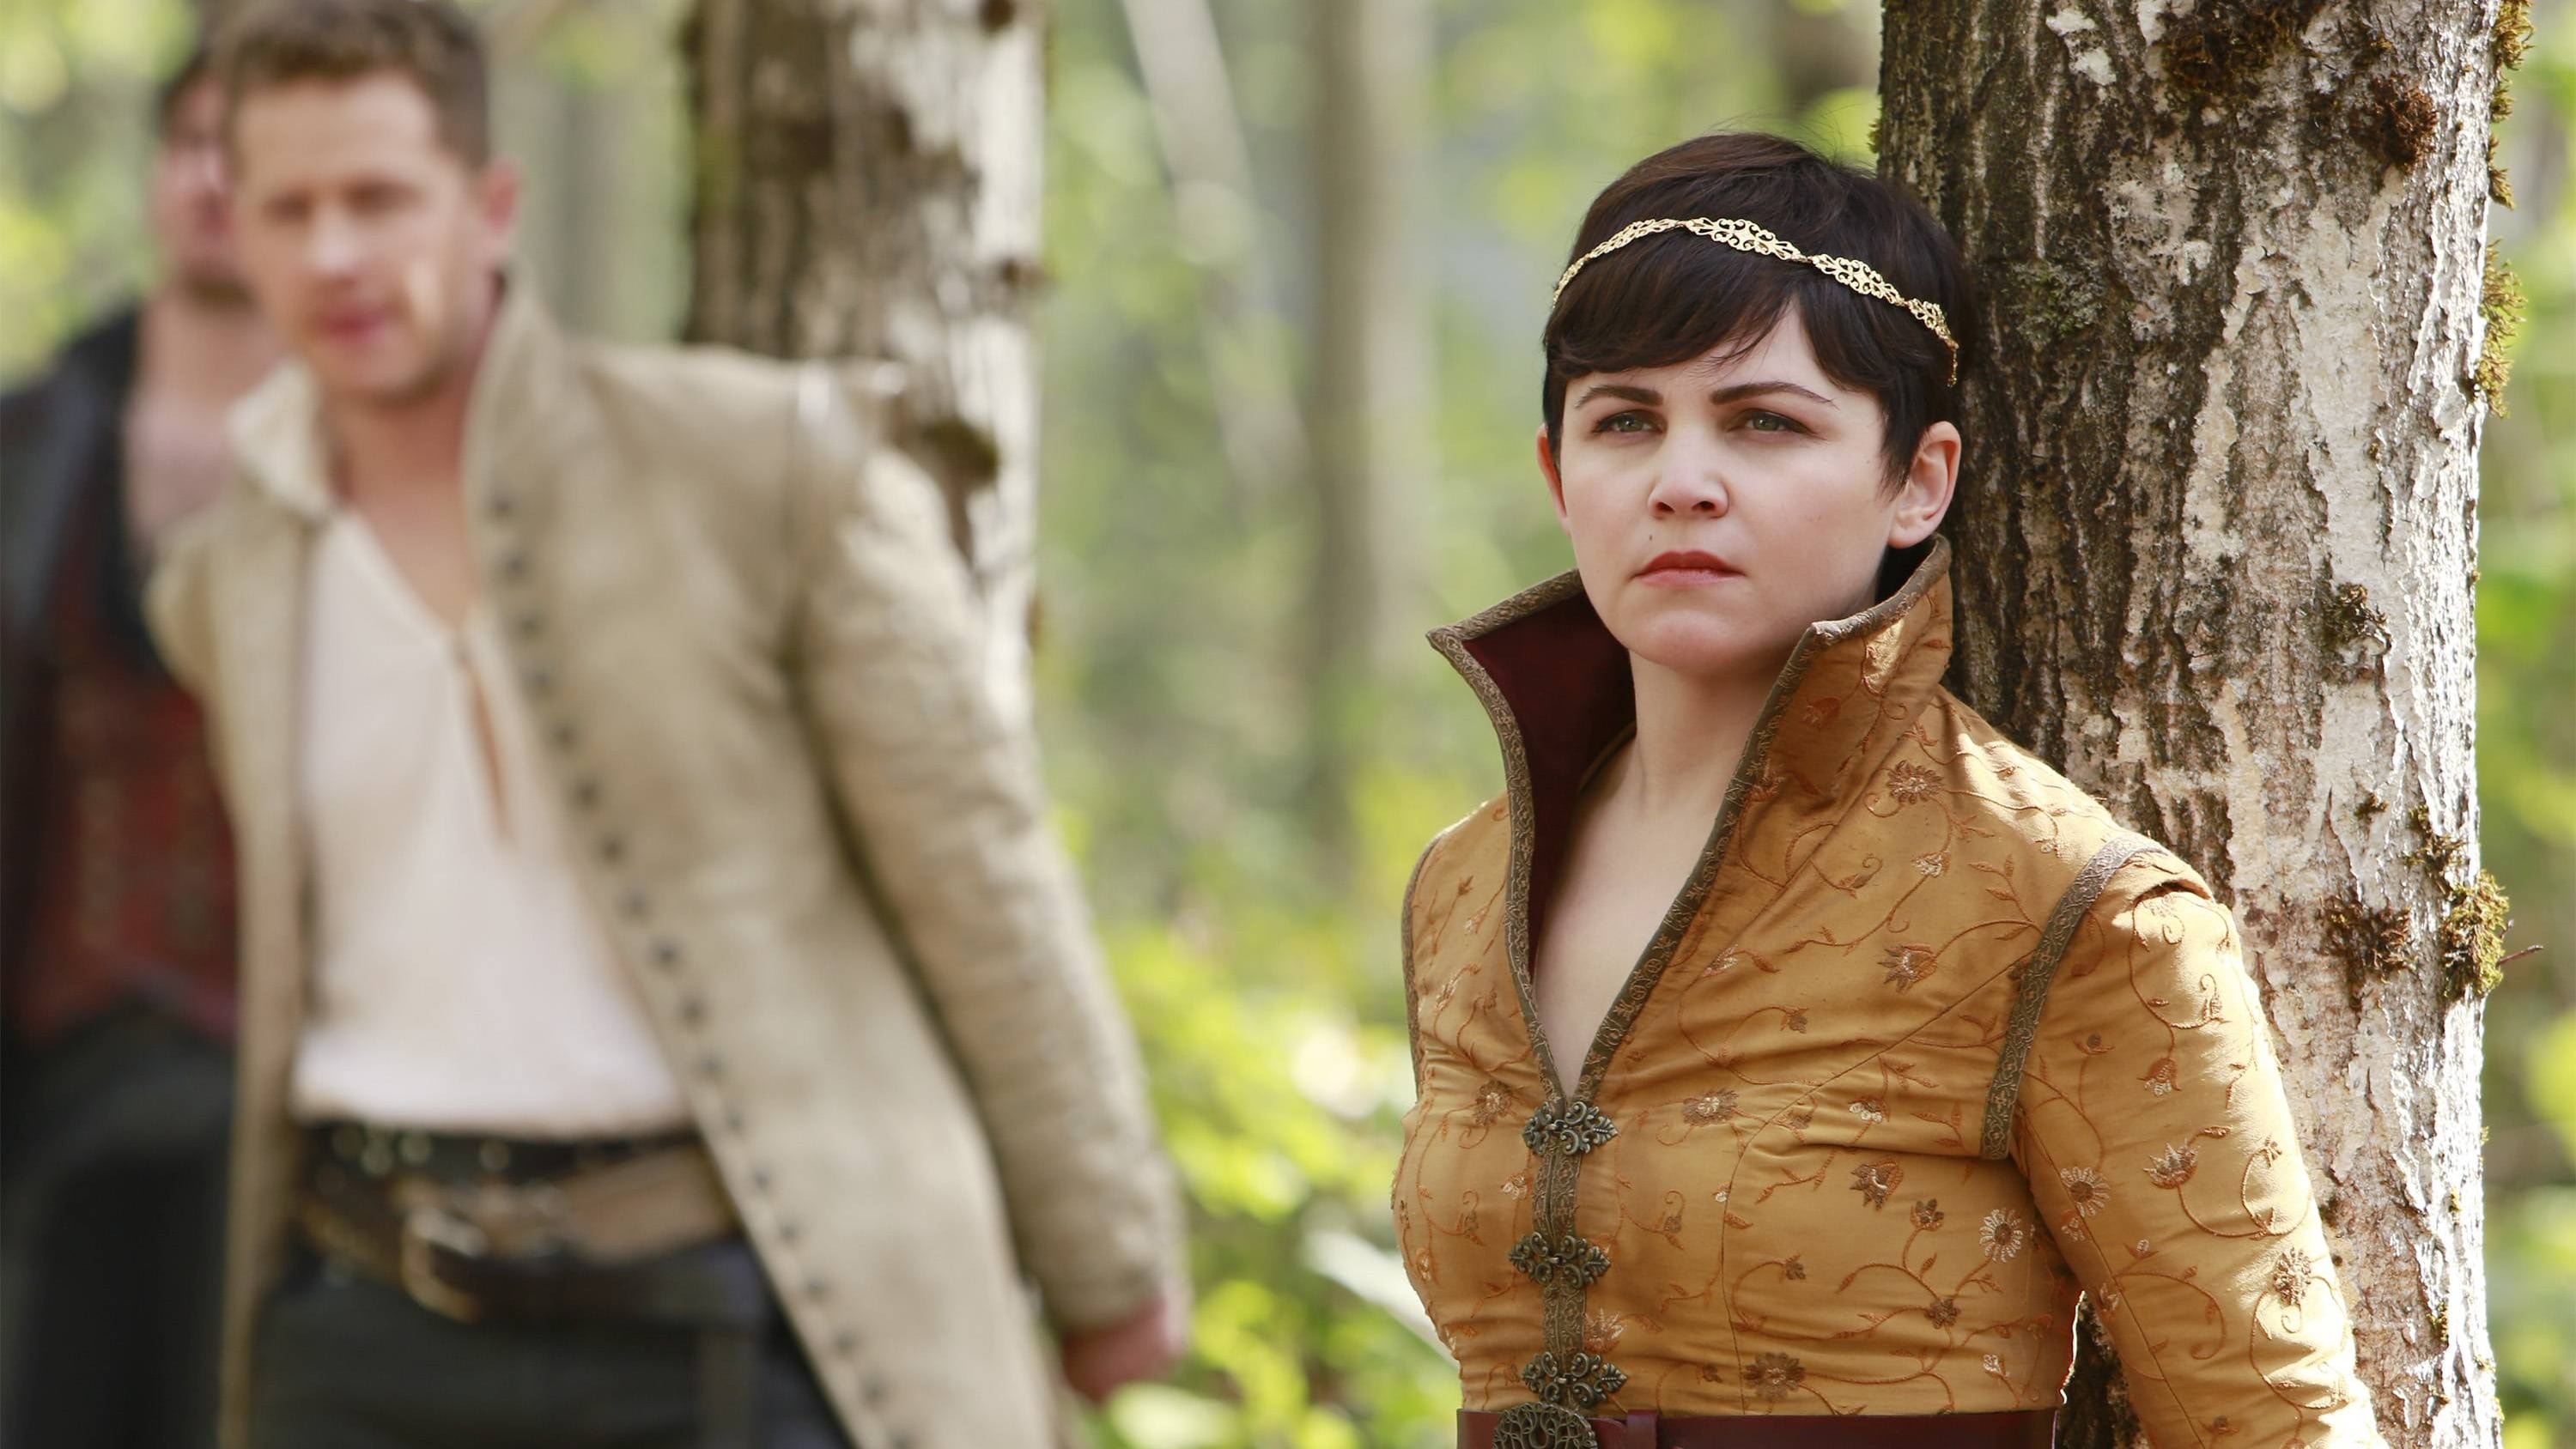 Once Upon a Time saison 5 episode 8 streaming vf - 𝐏𝐀𝐏𝐘𝐒𝐓𝐑𝐄𝐀𝐌𝐈𝐍𝐆 - Once Upon A Time Saison 5 Streaming